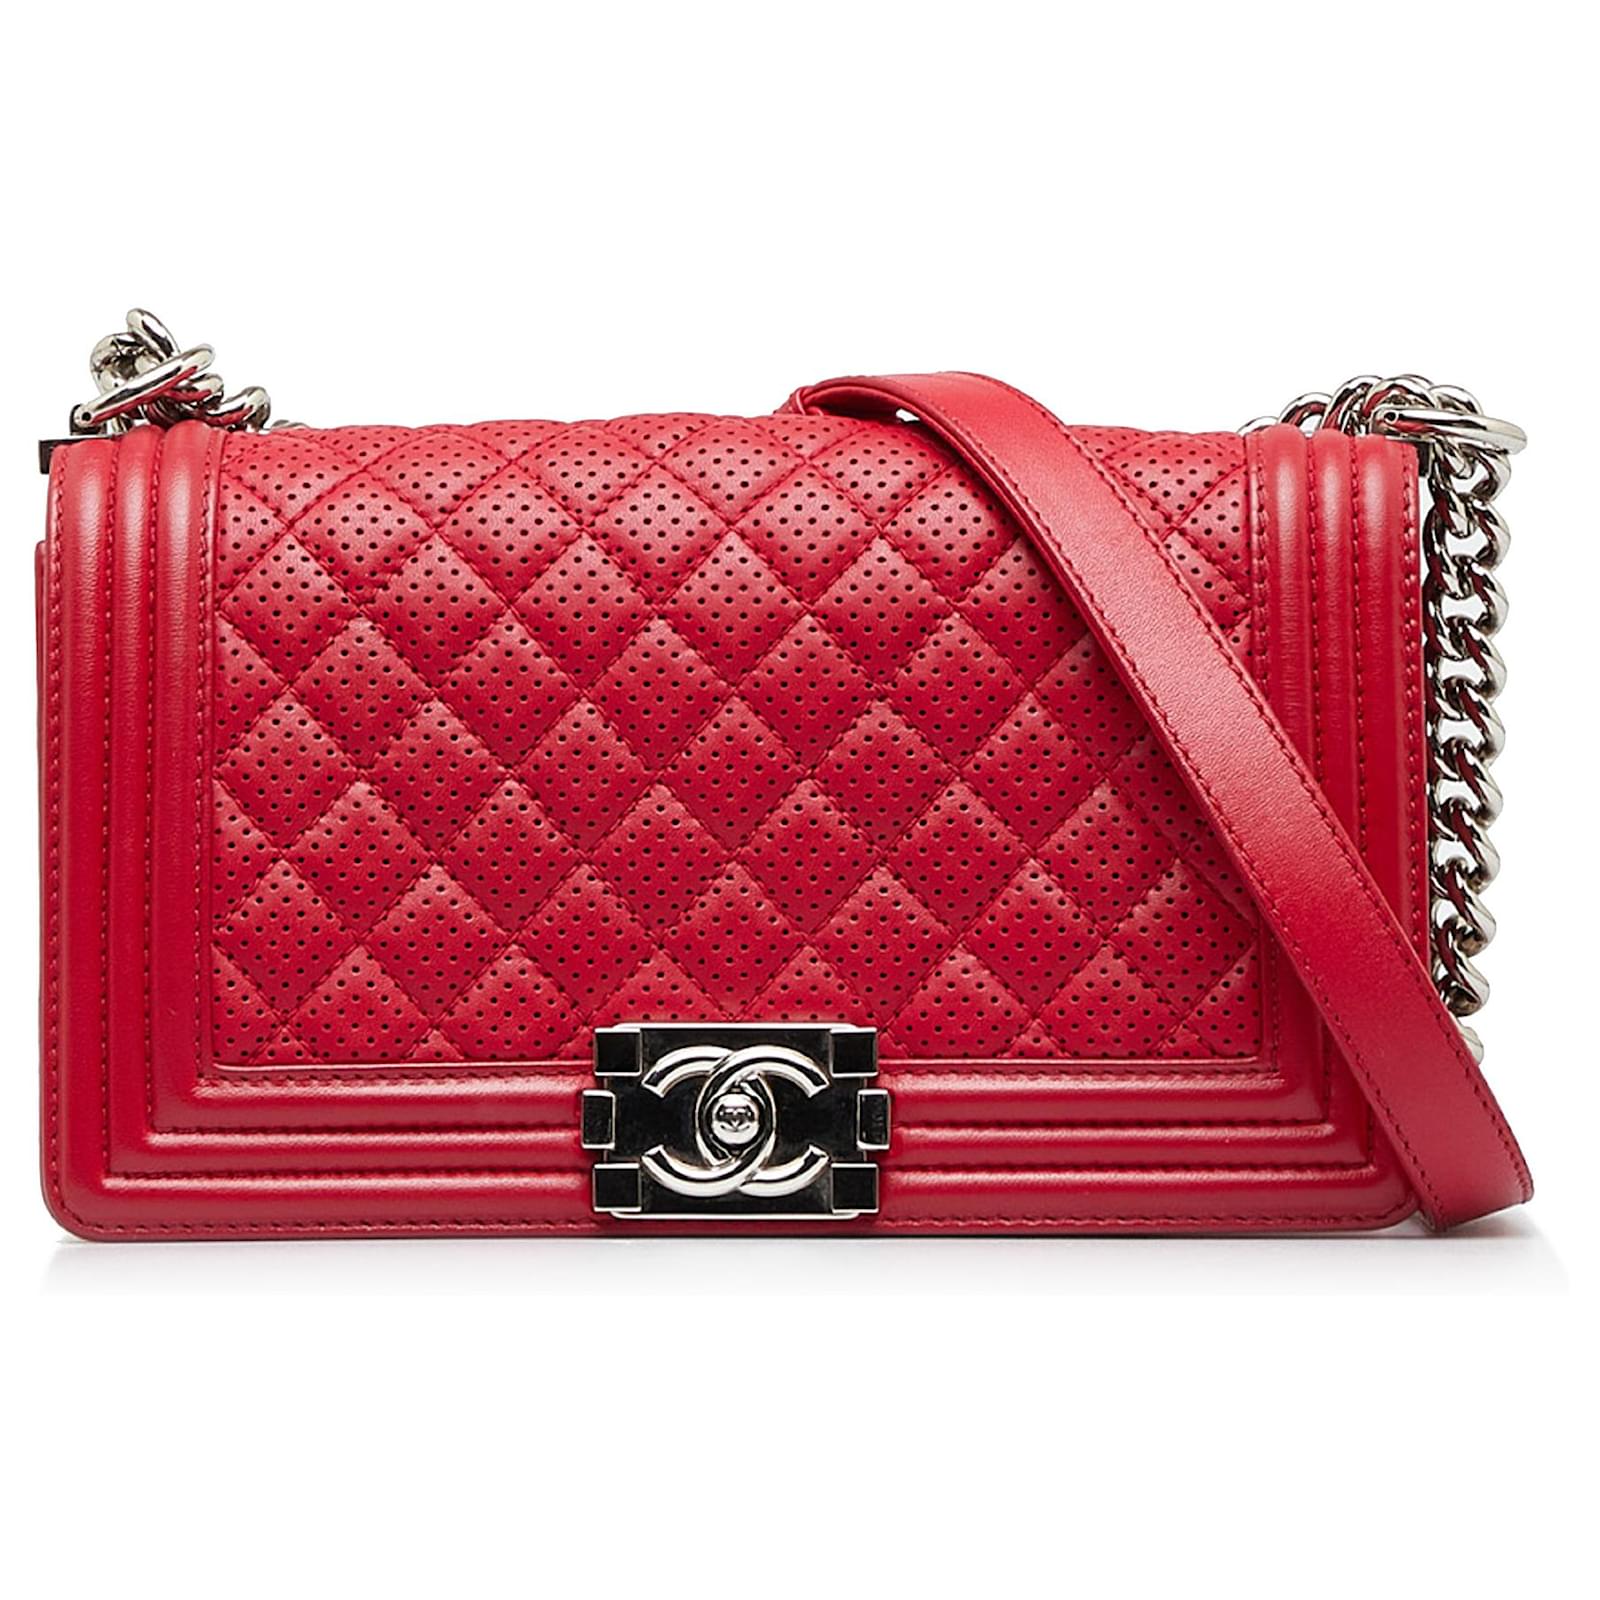 CHANEL LAMBSKIN NO.19 RED BOY PERFORATED SHOULDER BAG 227001689